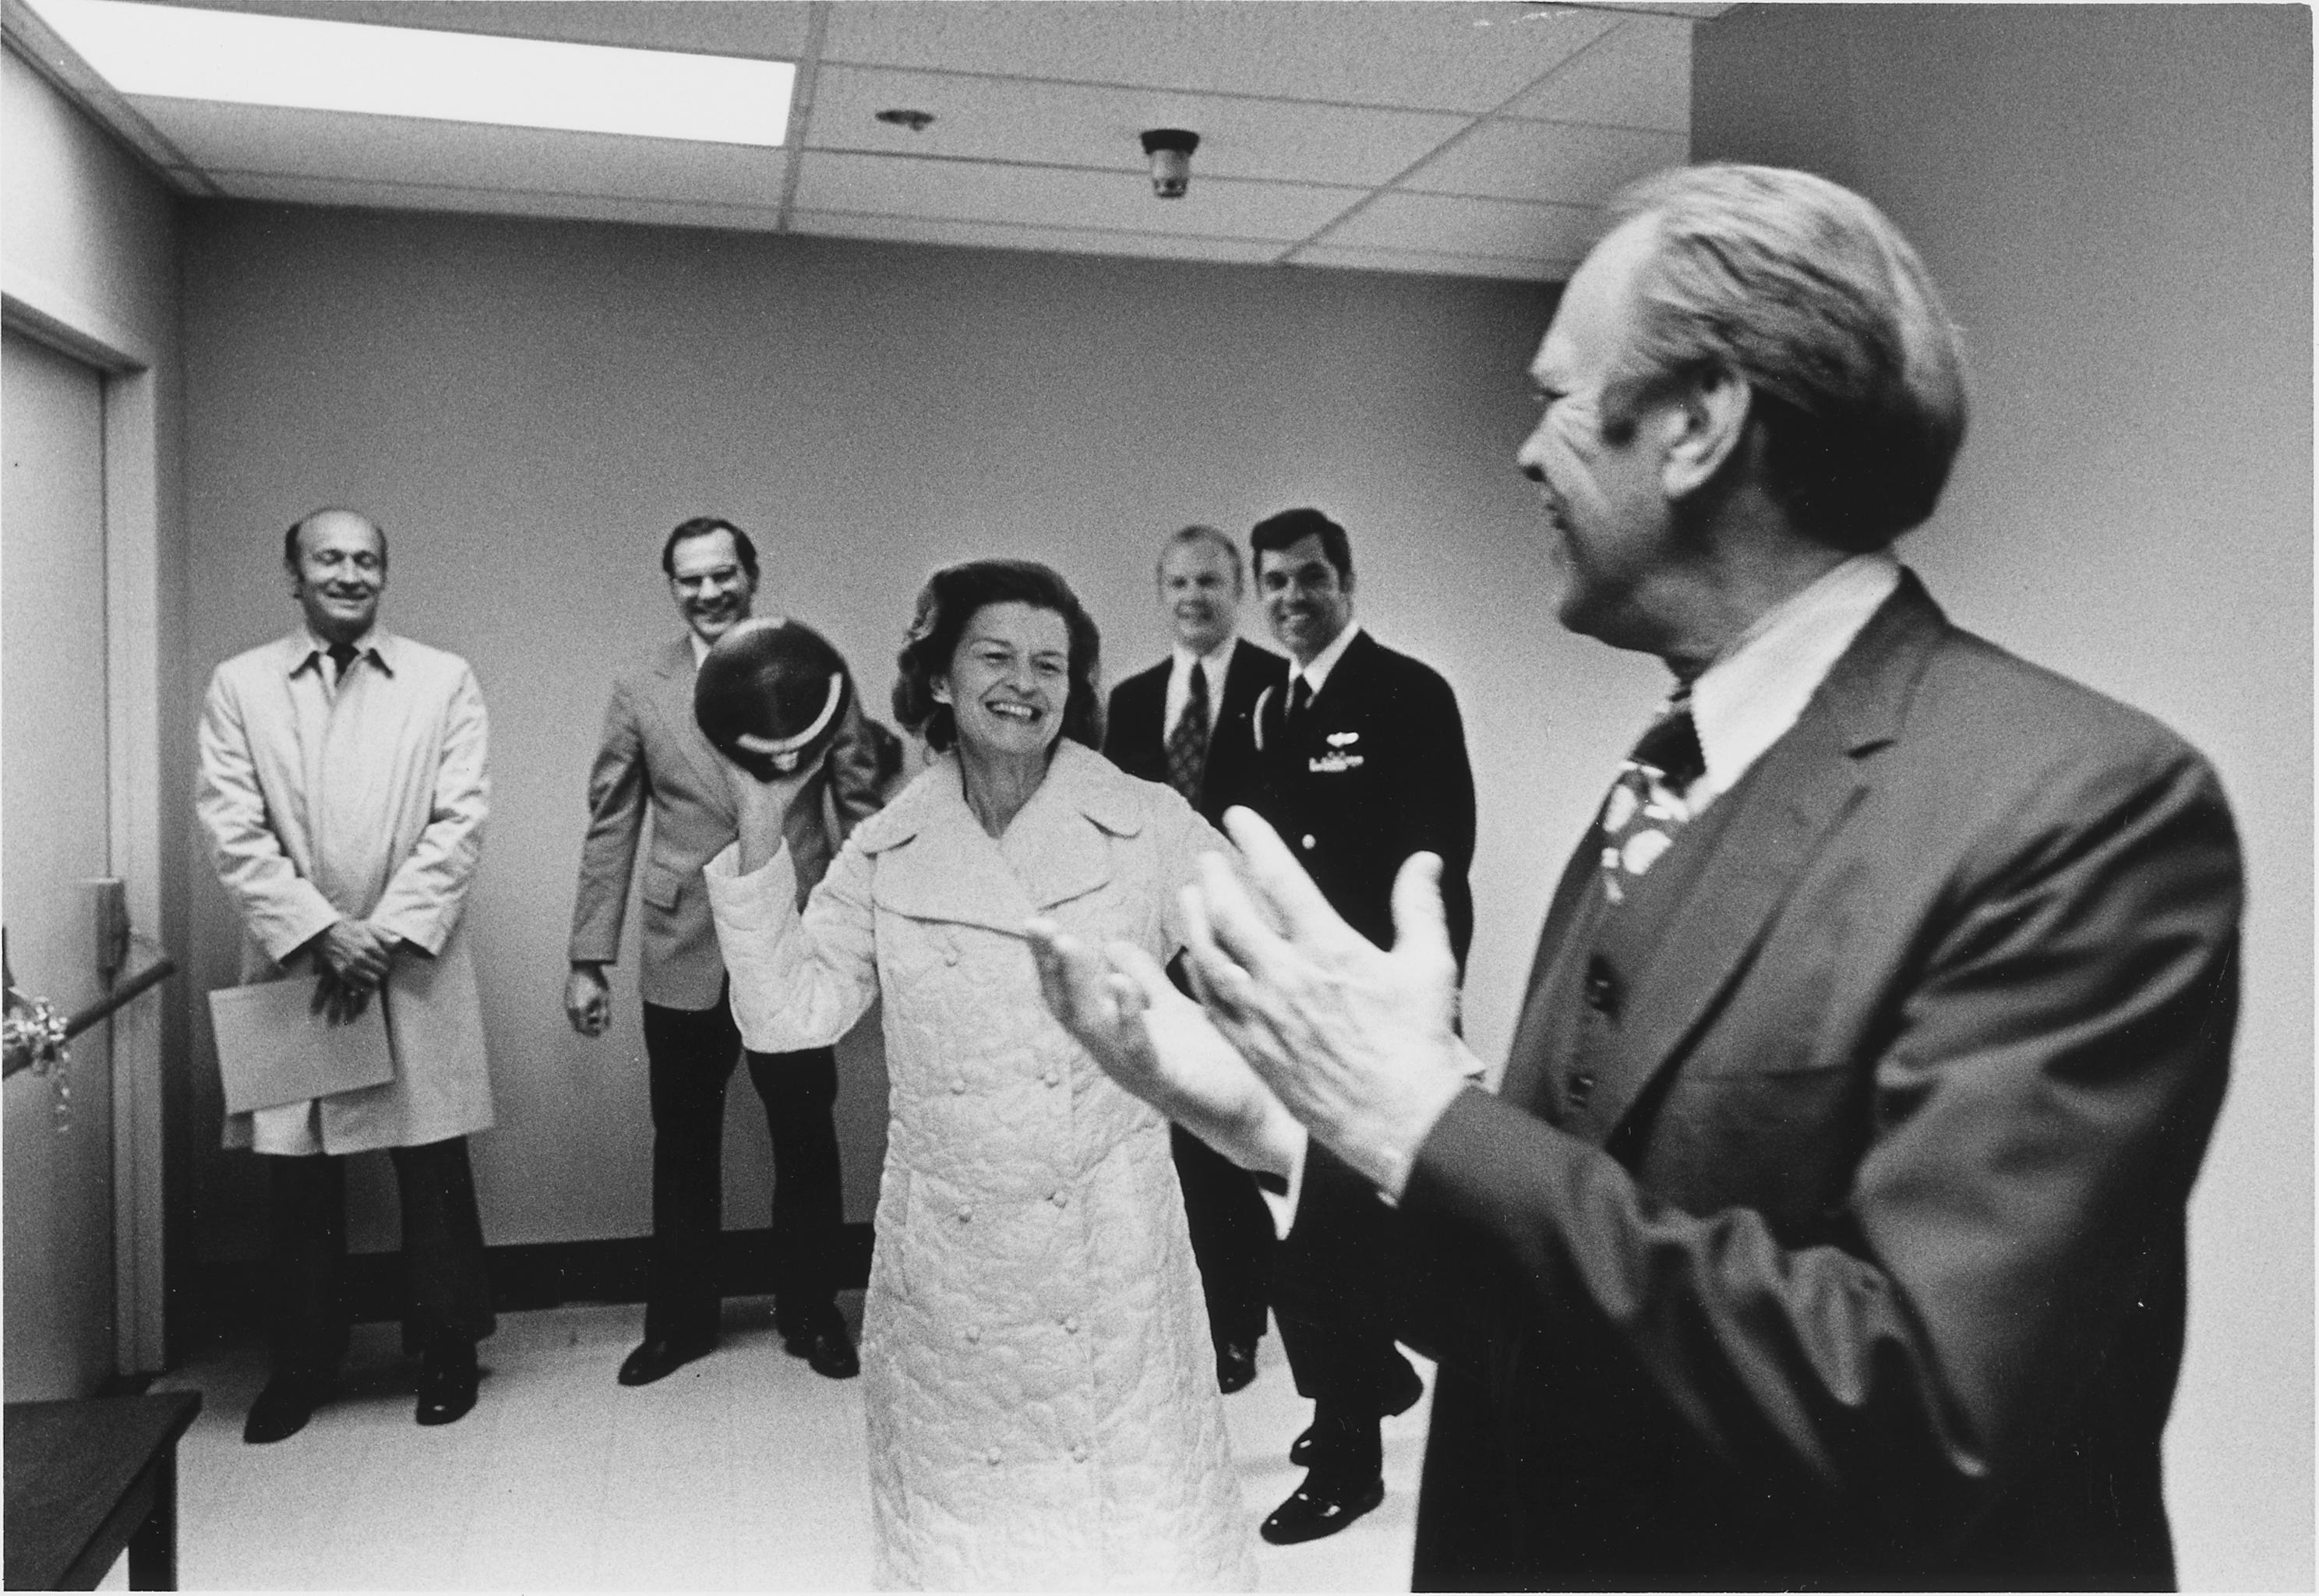 The President catches a toss thrown by First Lady Betty Ford as they create a lighthearted distraction before she underwent breast cancer surgery, 1974.